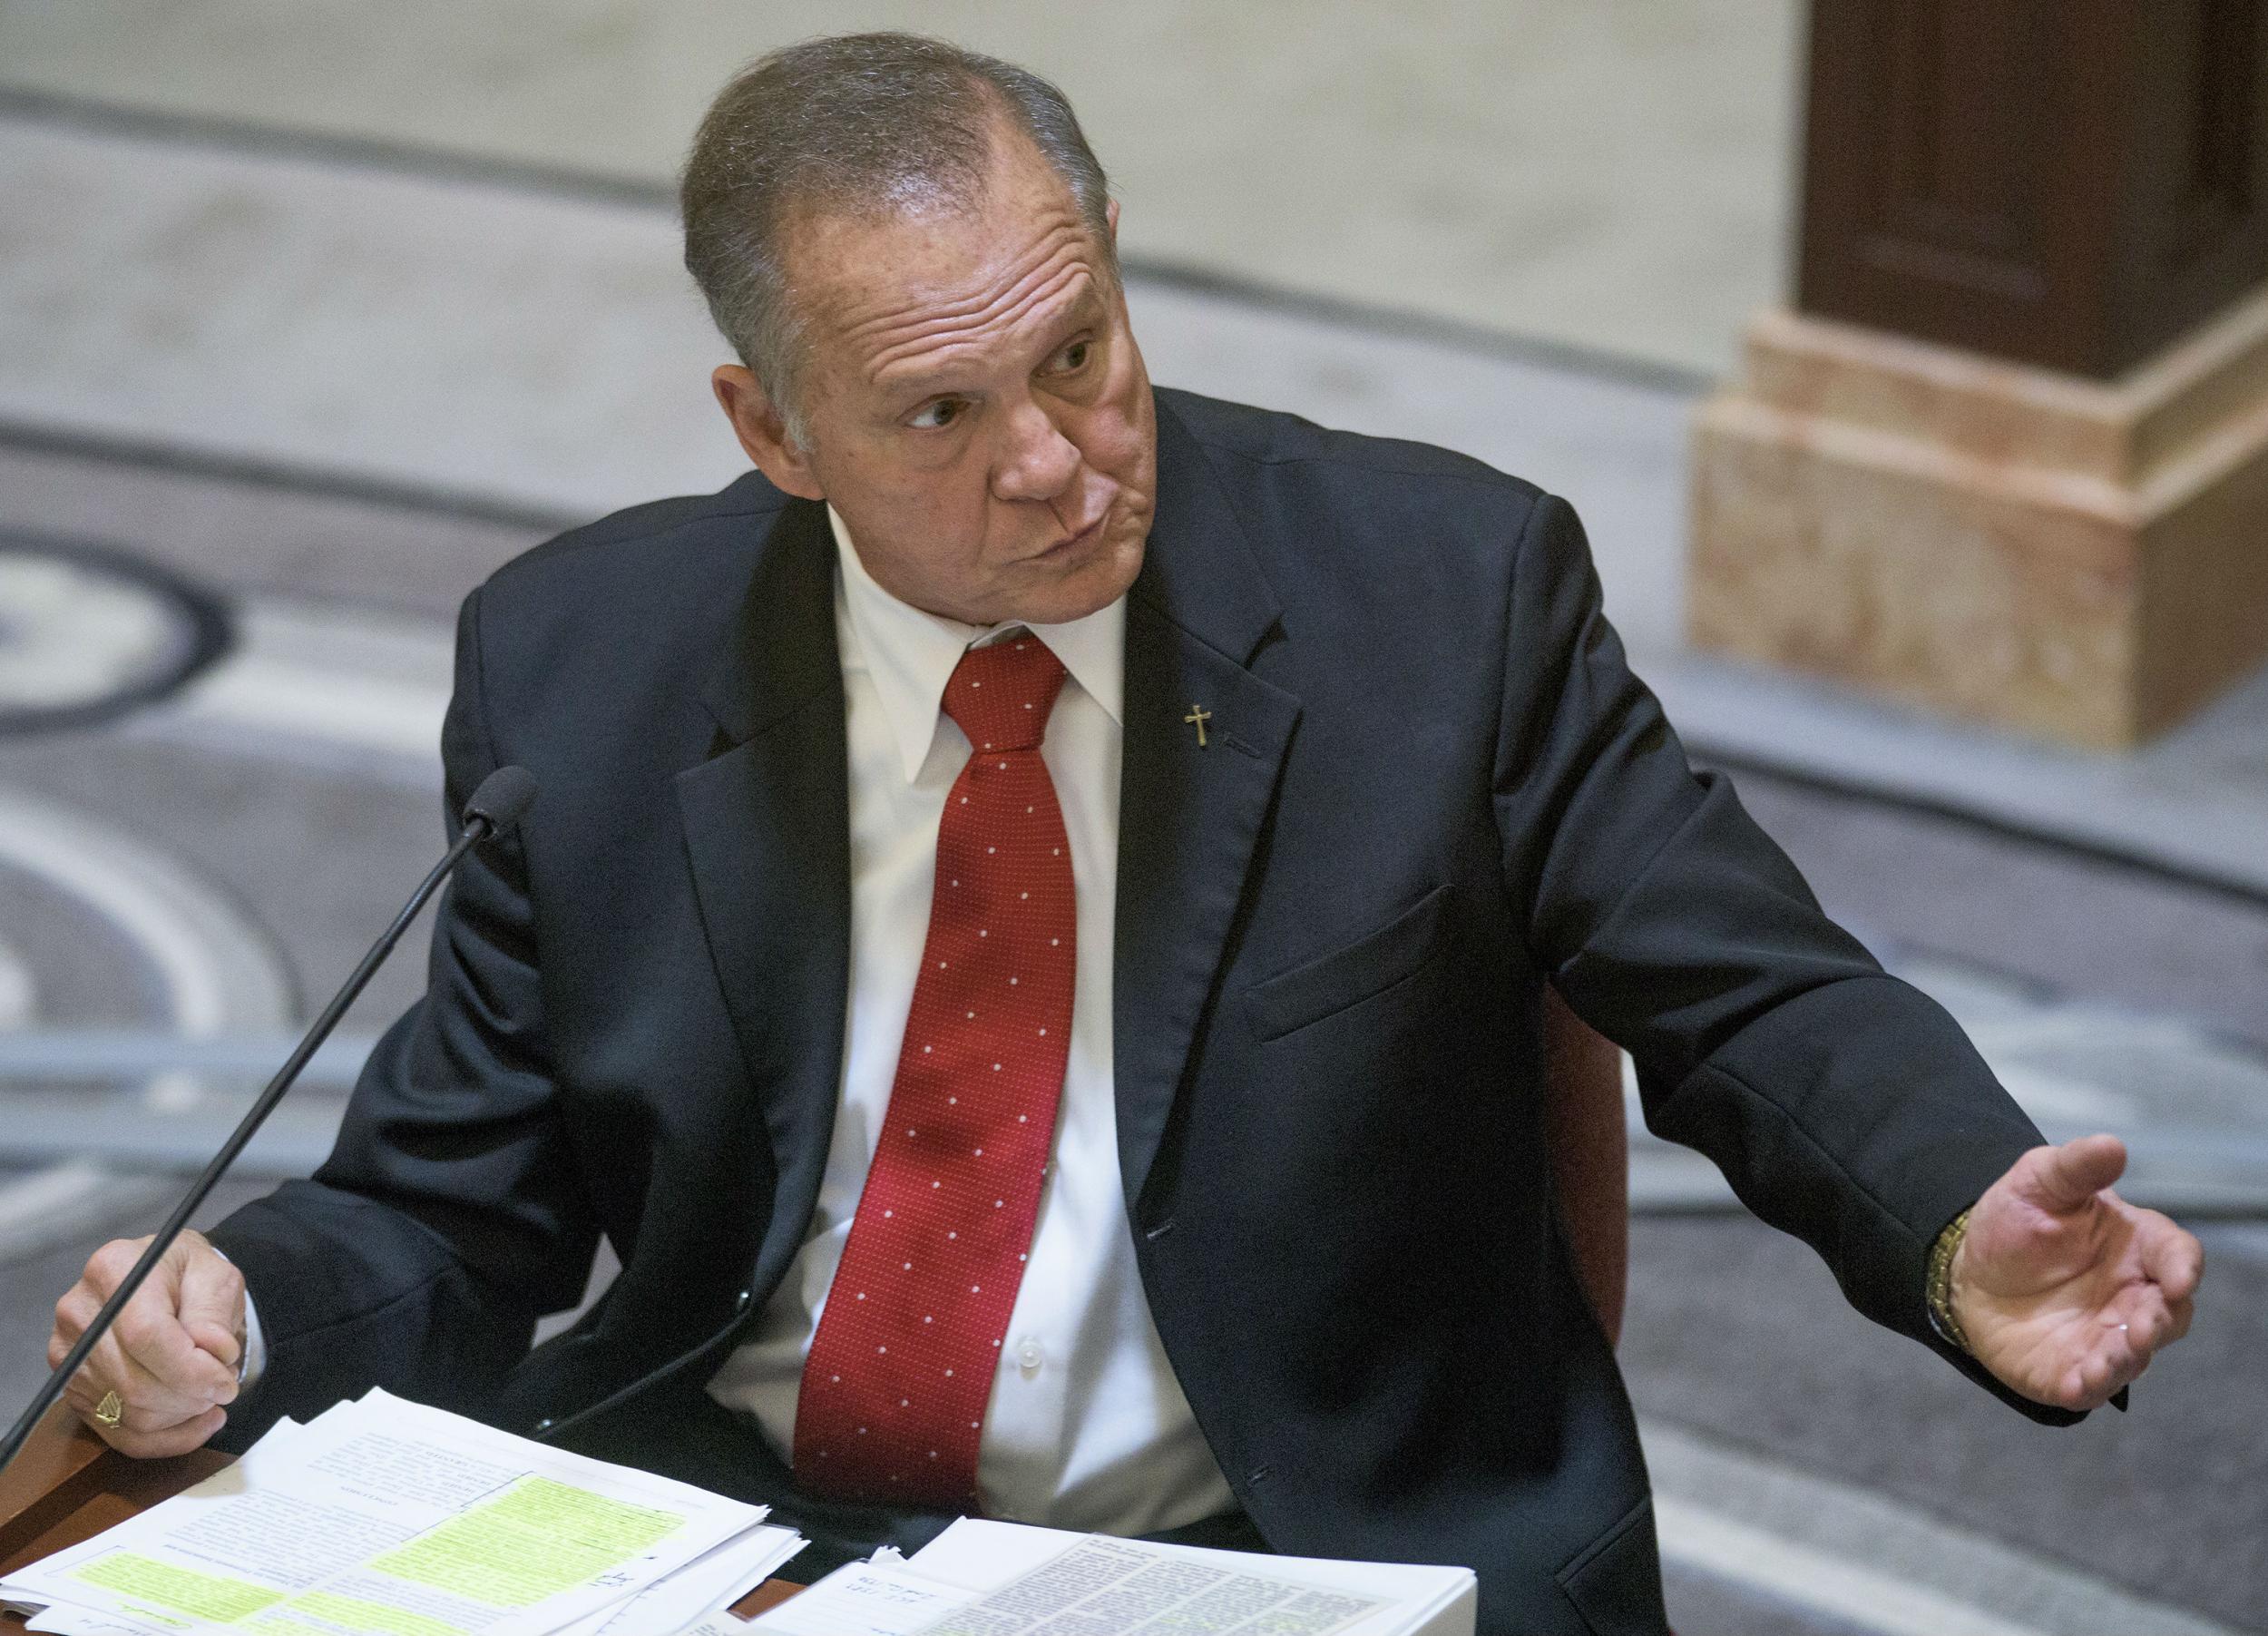 Alabama chief justice suspended without pay for stopping samesex marriage licenses  The 